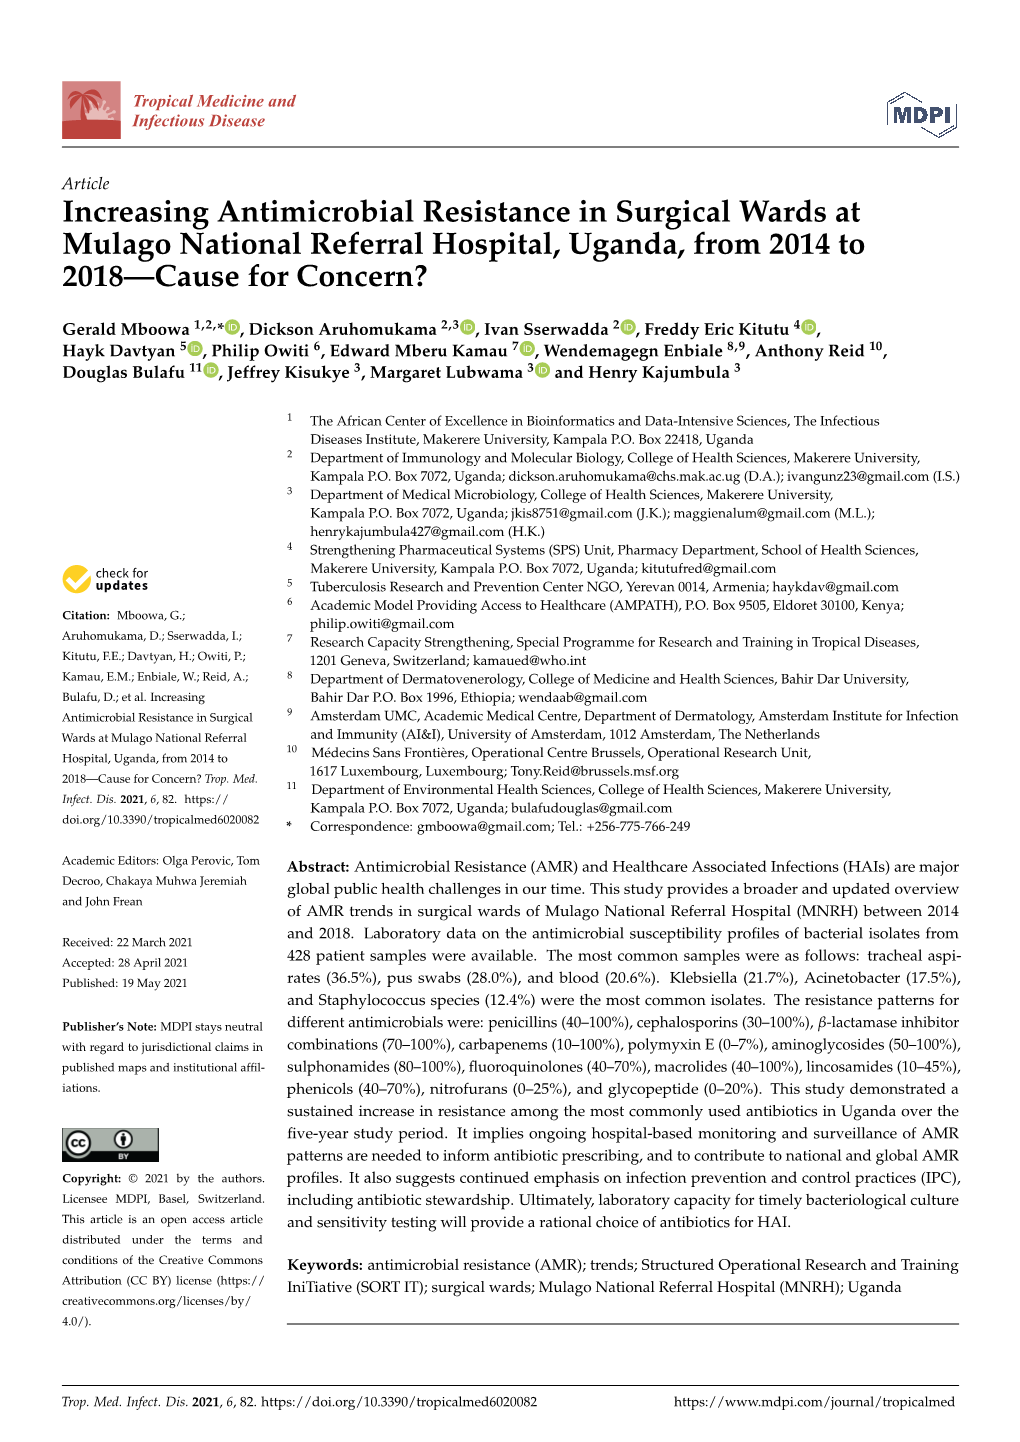 Increasing Antimicrobial Resistance in Surgical Wards at Mulago National Referral Hospital, Uganda, from 2014 to 2018—Cause for Concern?